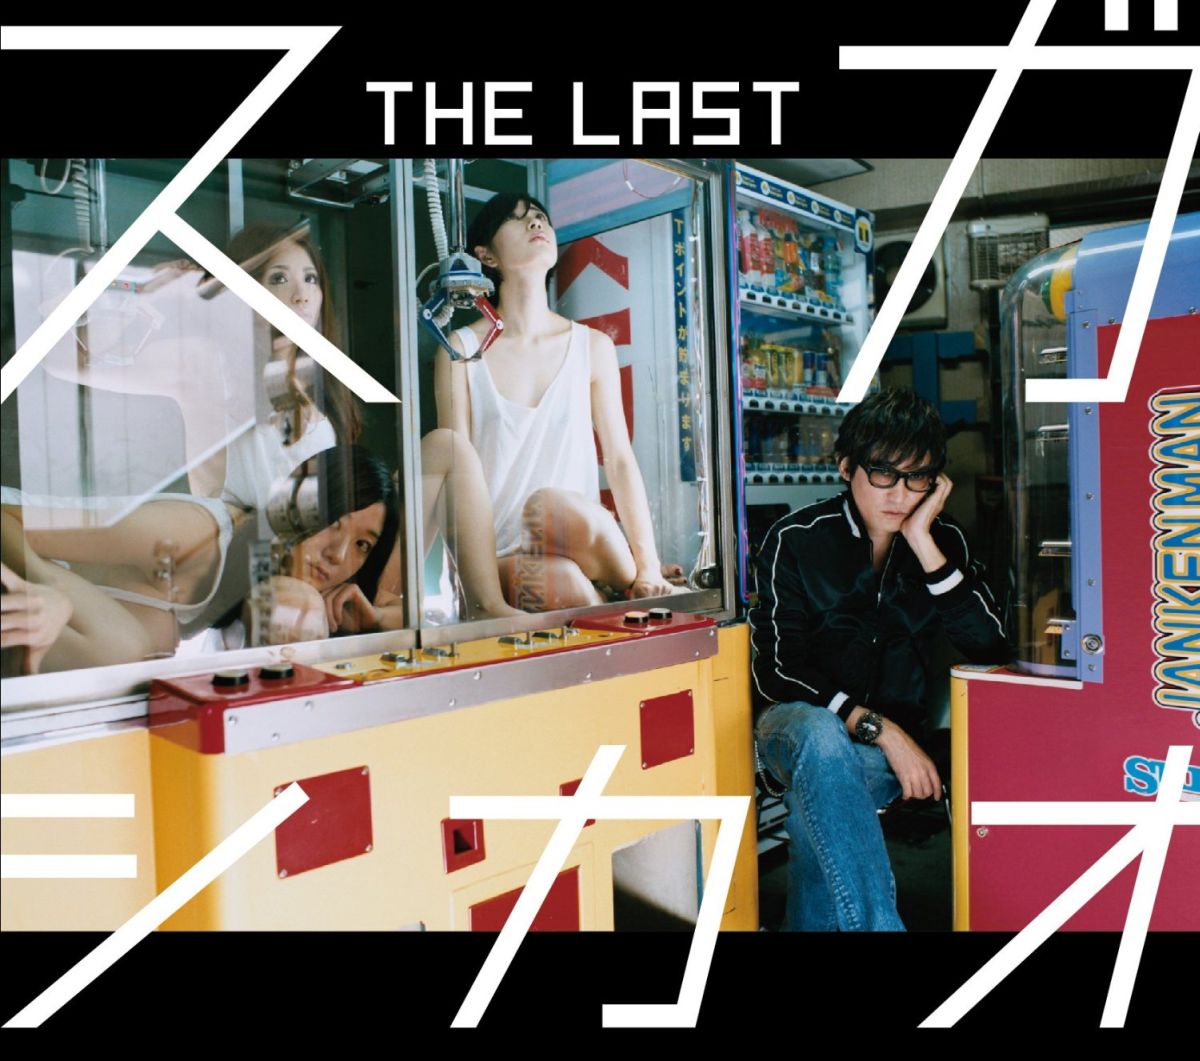 THE LAST (初回限定盤 CD＋SPECIAL CD「THE BEST」) [ スガシカオ ]